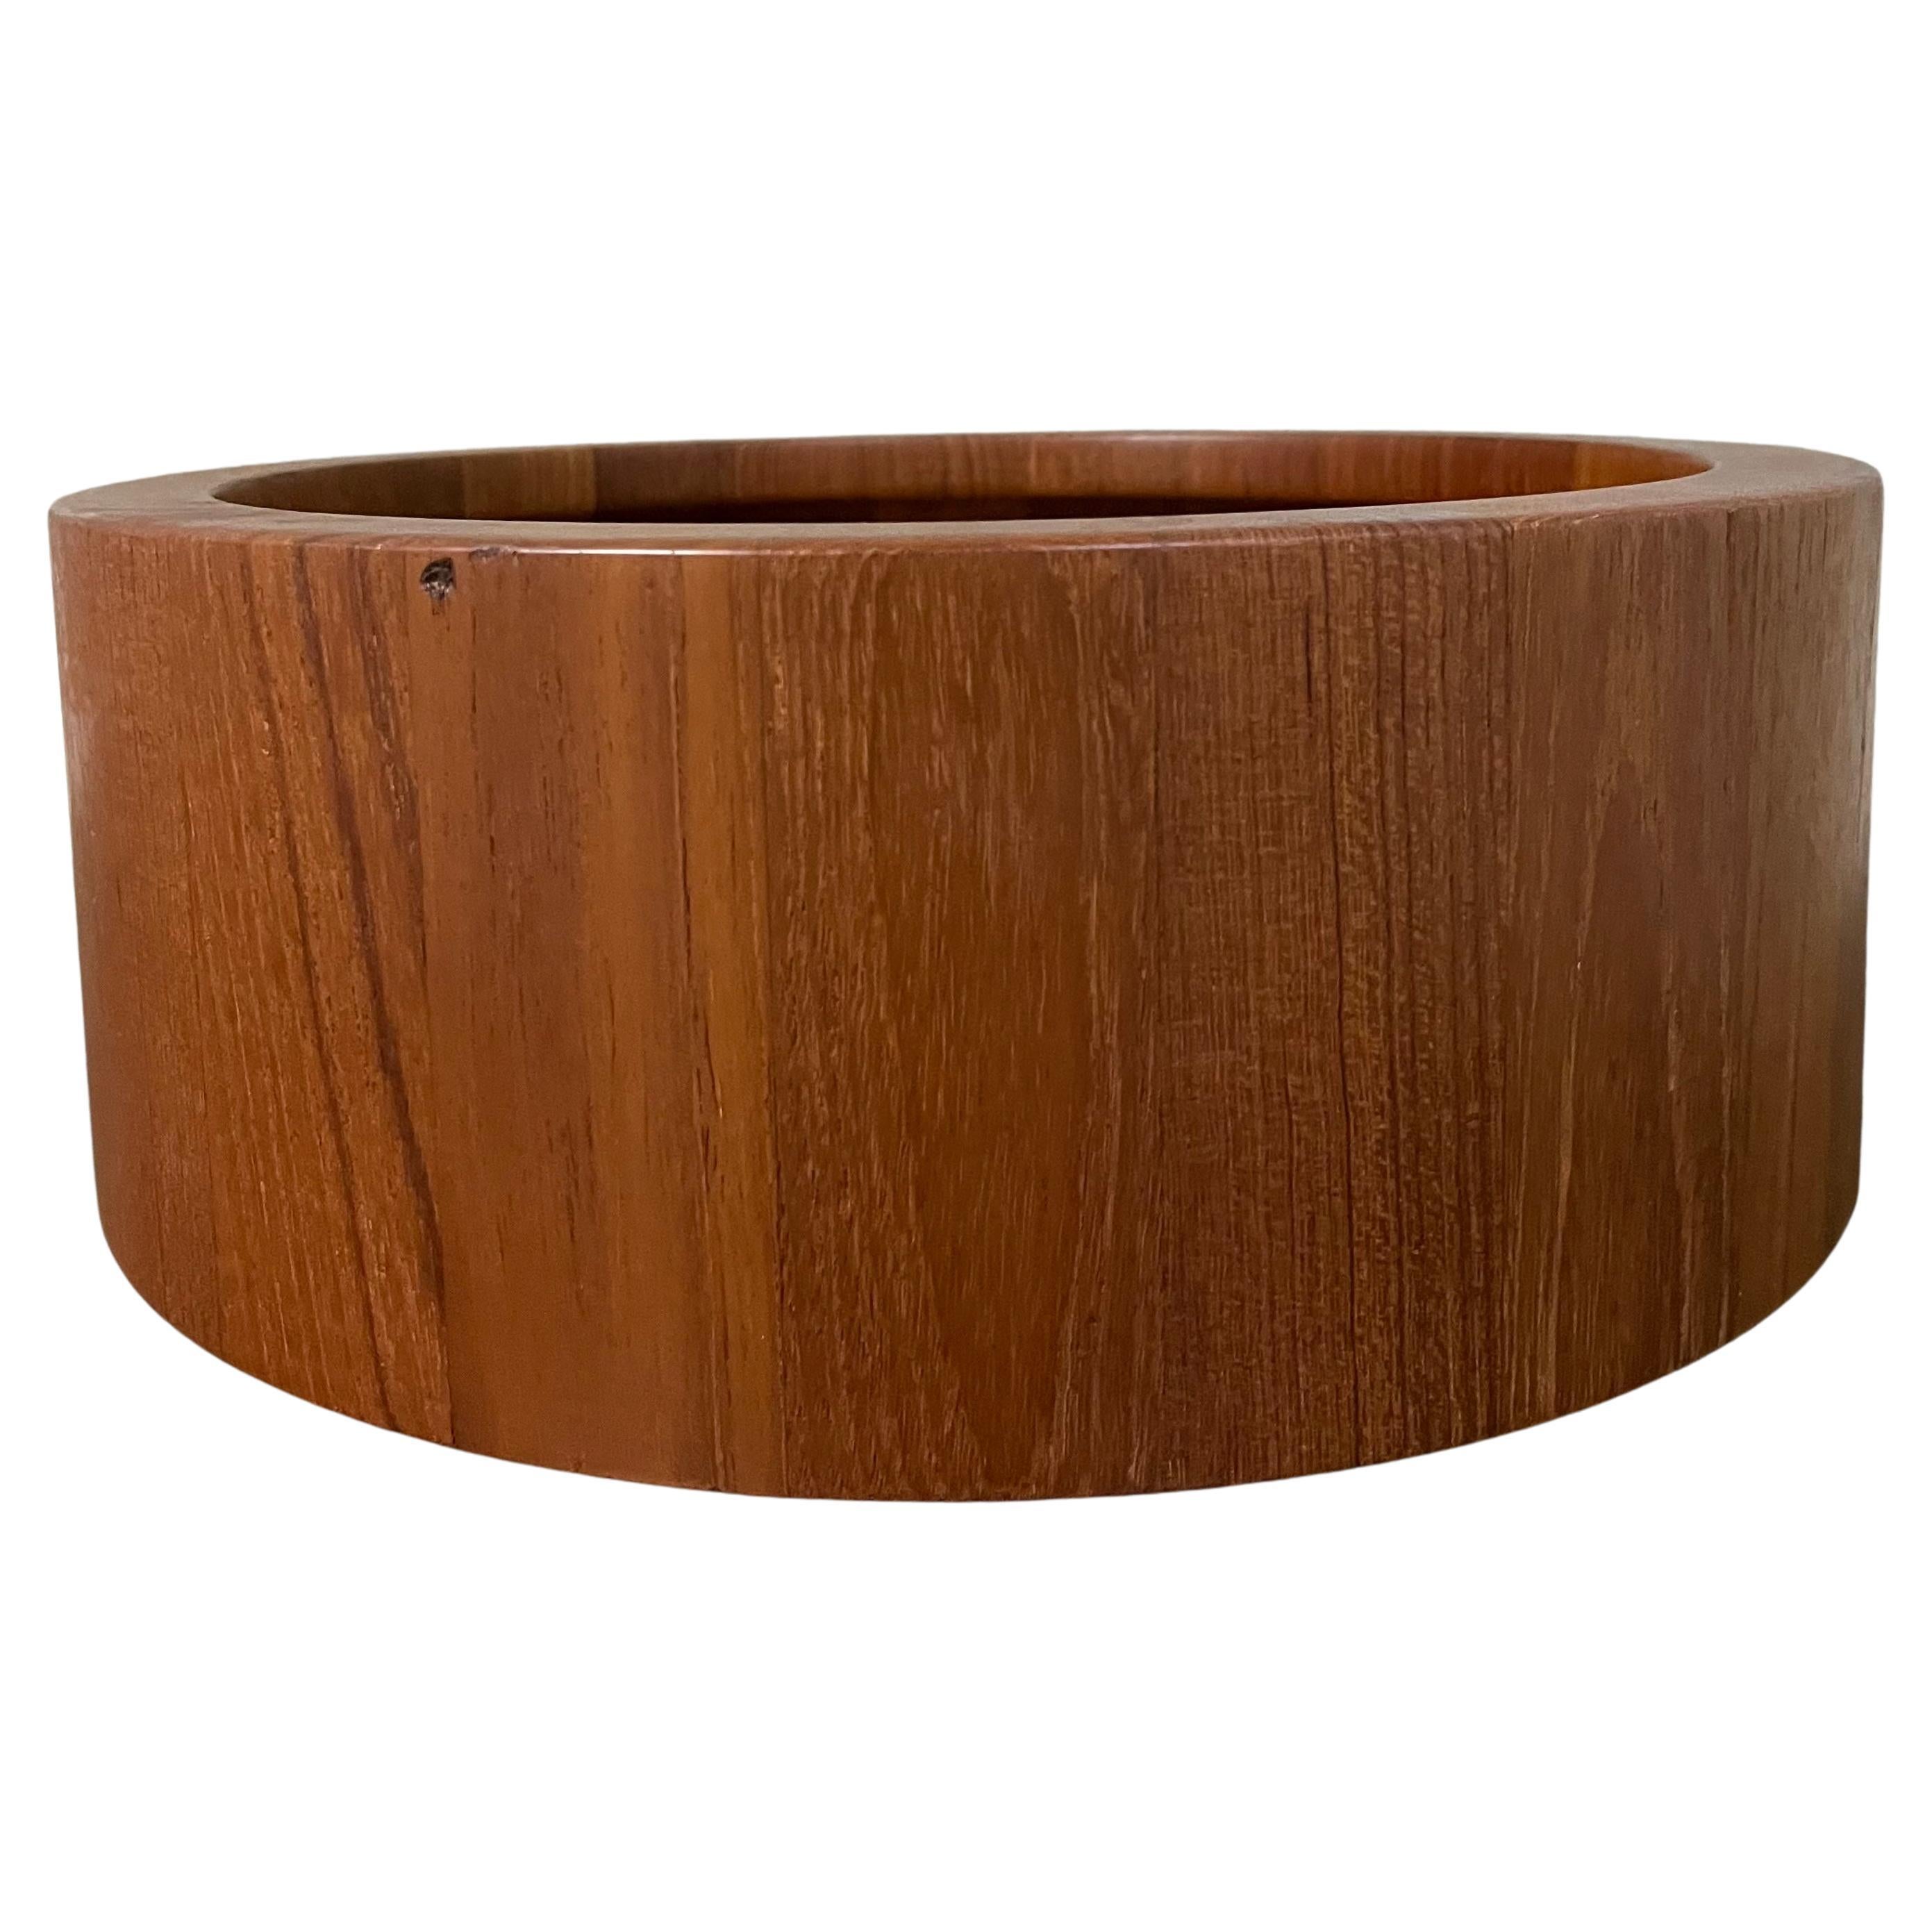 Mid Century Danish Modern Mid Size Teak Serving Bowl by Jens Quistgaard for Dansk. Circa 1970s 
Features a beautiful staved teak wood construction and a quintessential Mid Century Modern Scandinavian Design.
In excellent original condition with